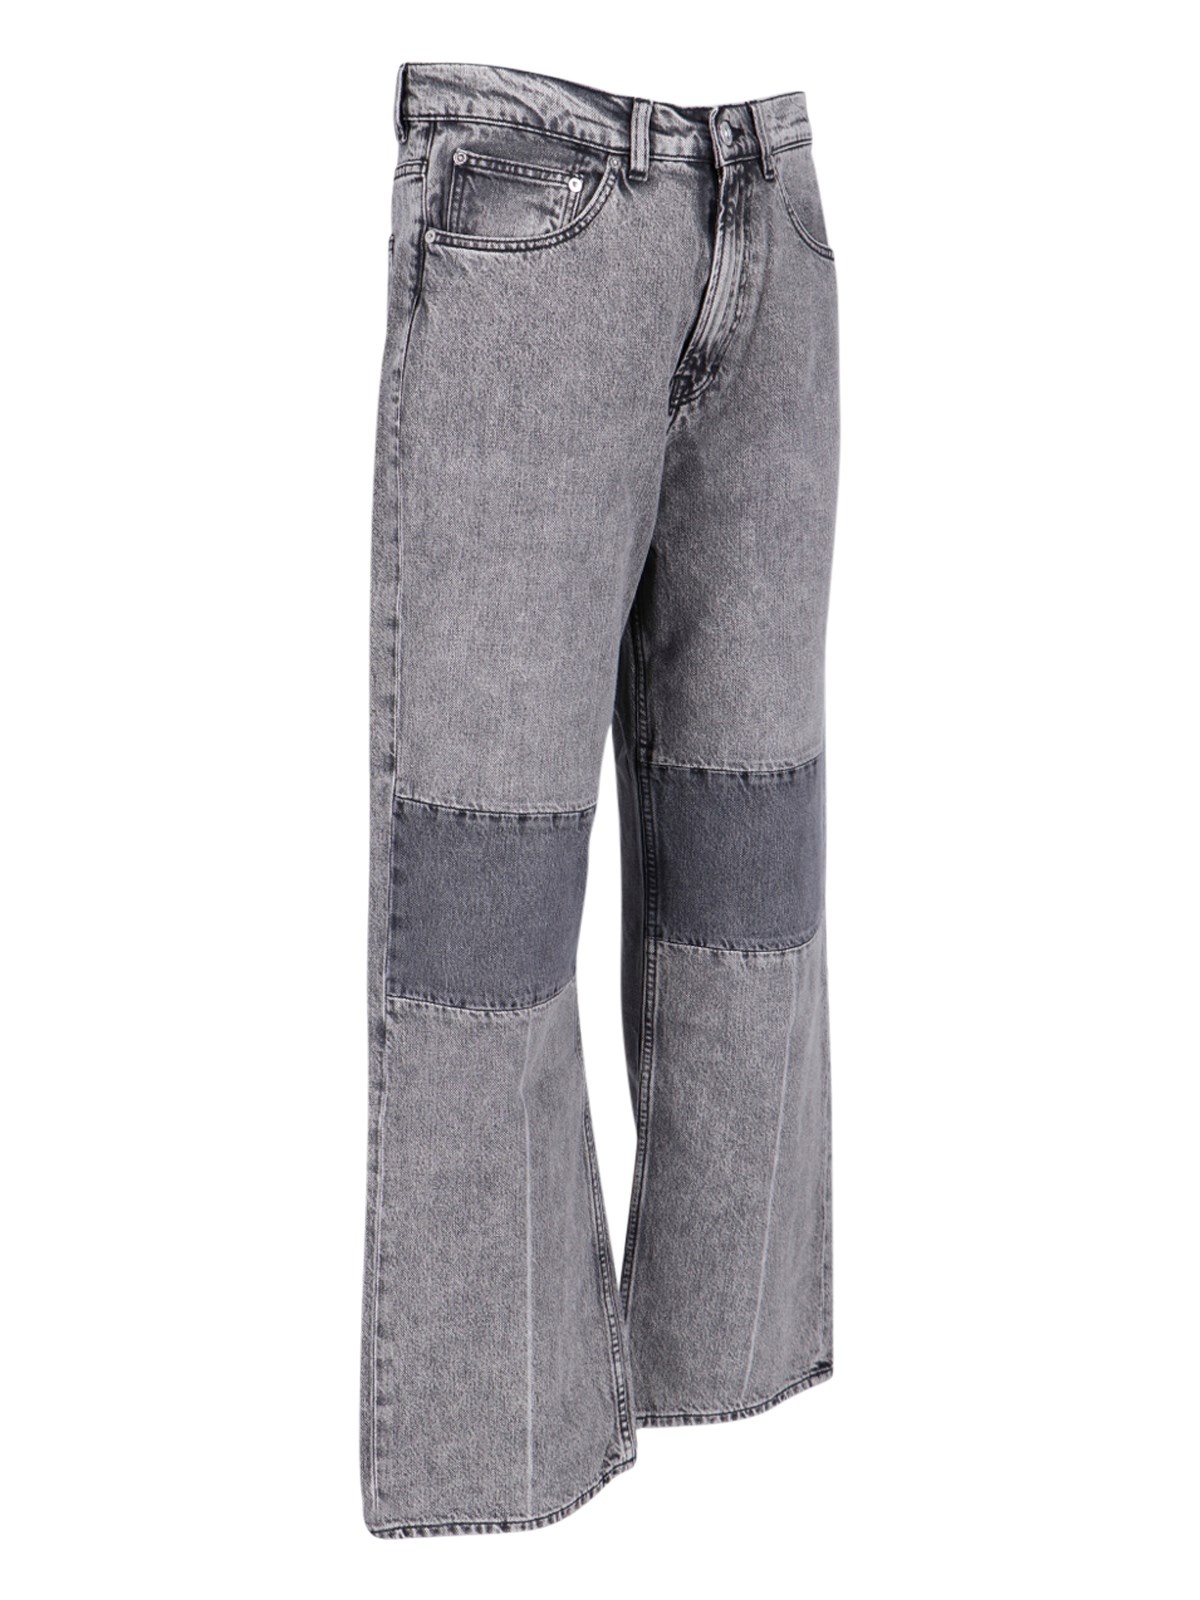 "EXTENDED THIRD CUT" JEANS - 2